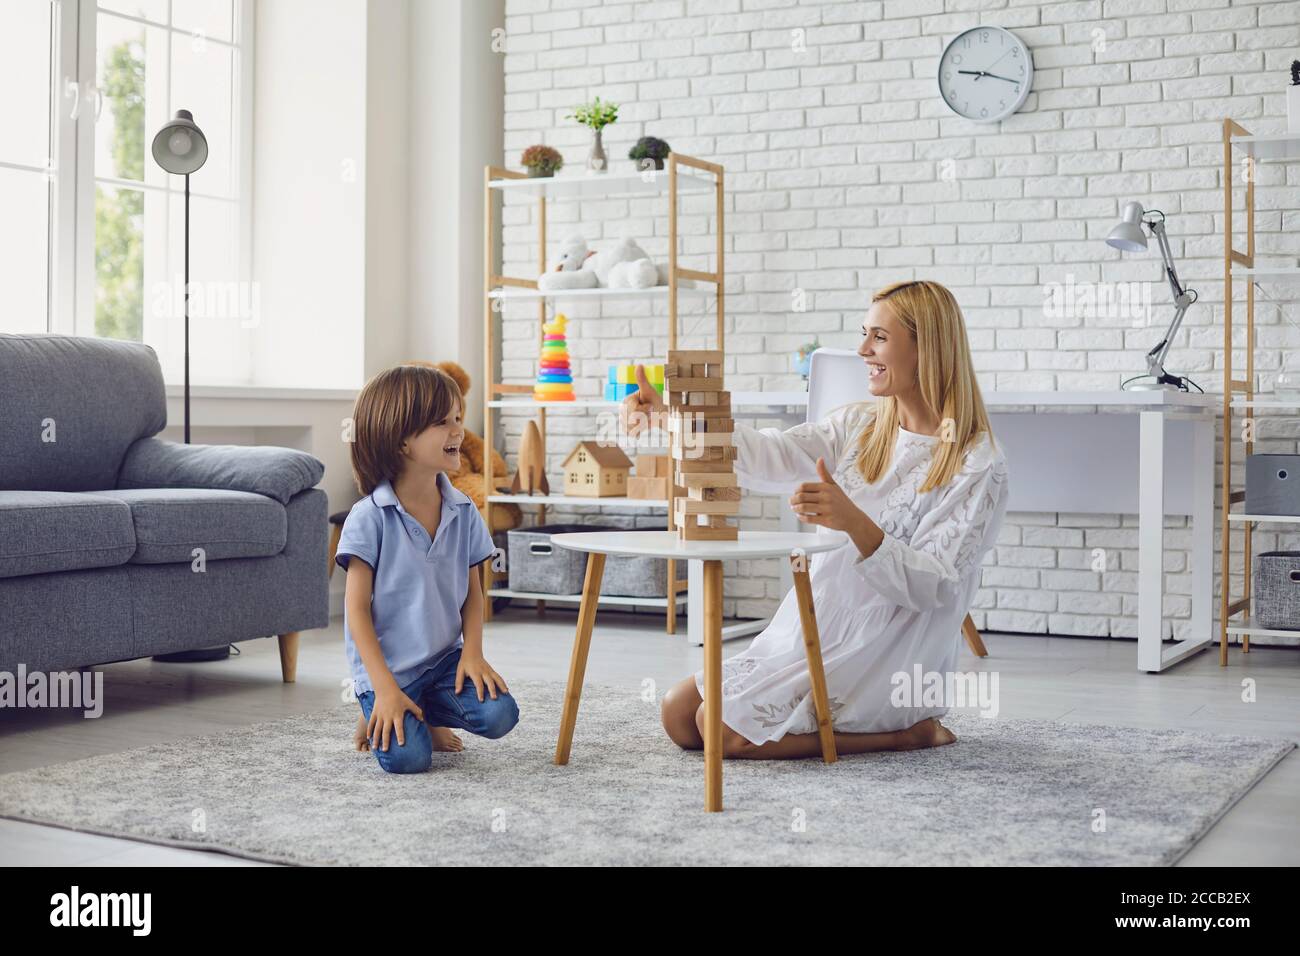 Mother and child have fun playing board games at home. Stock Photo